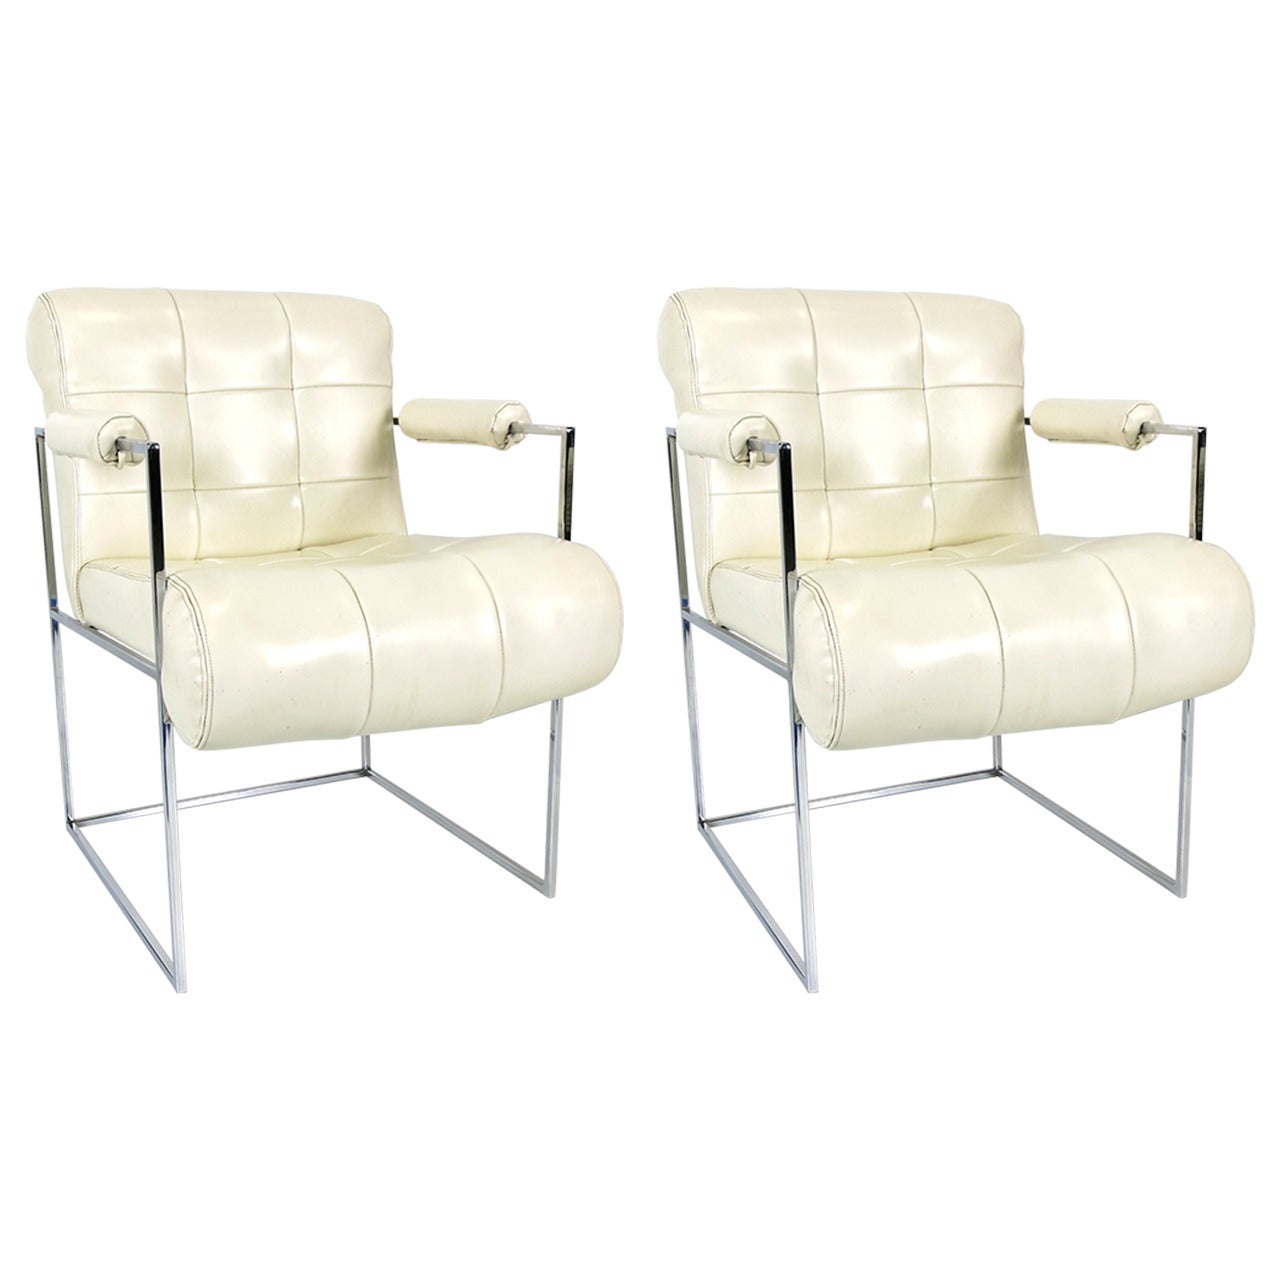 Pair of Chrome Thin Line Lounge Chairs by Milo Baughman